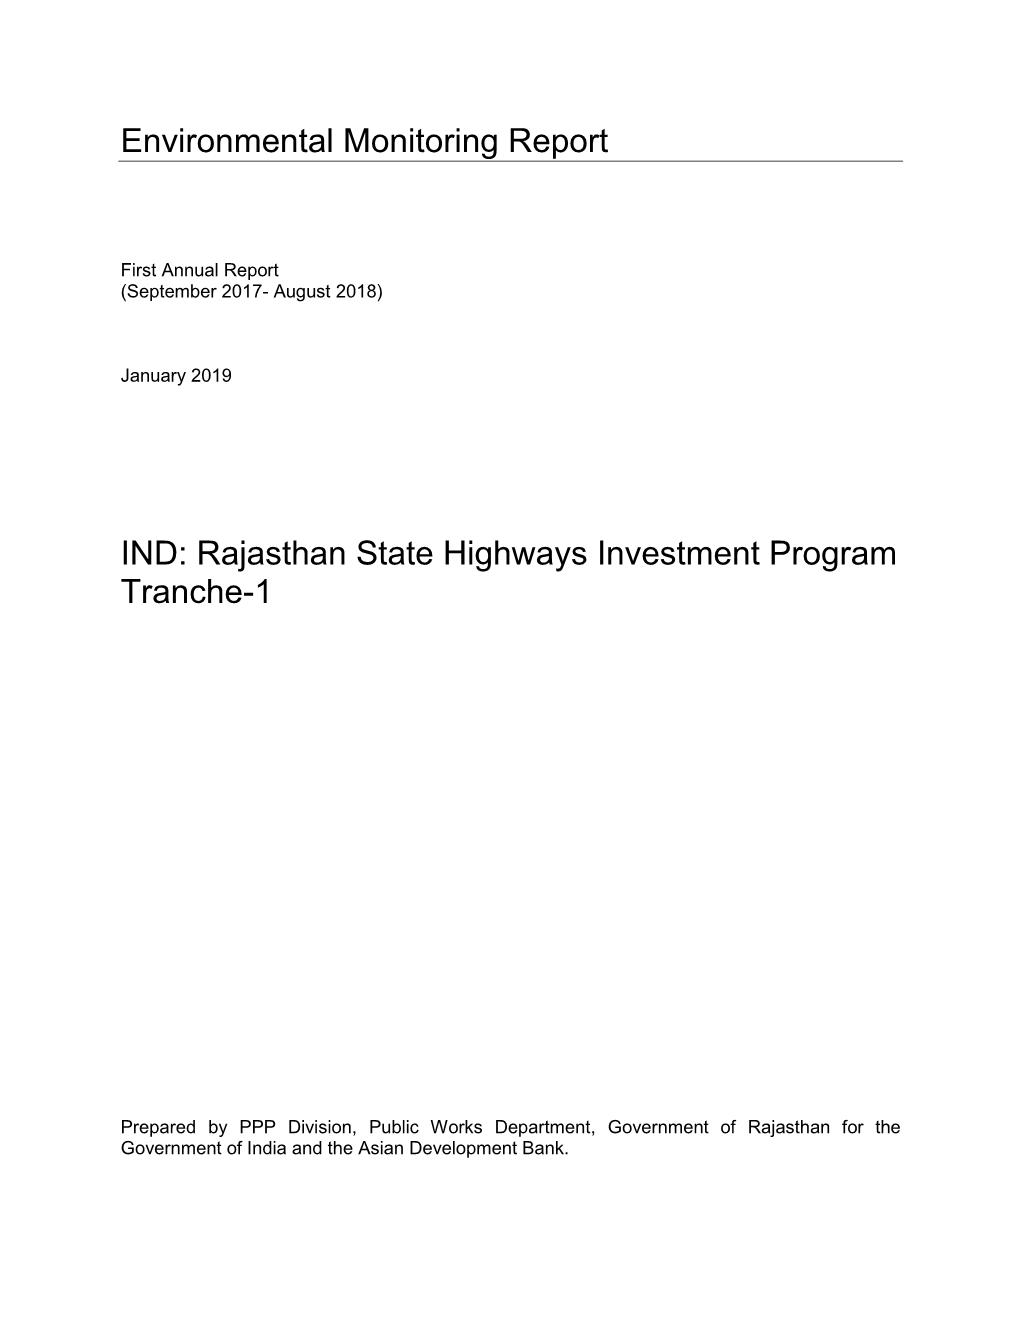 Rajasthan State Highways Investment Program Tranche-1